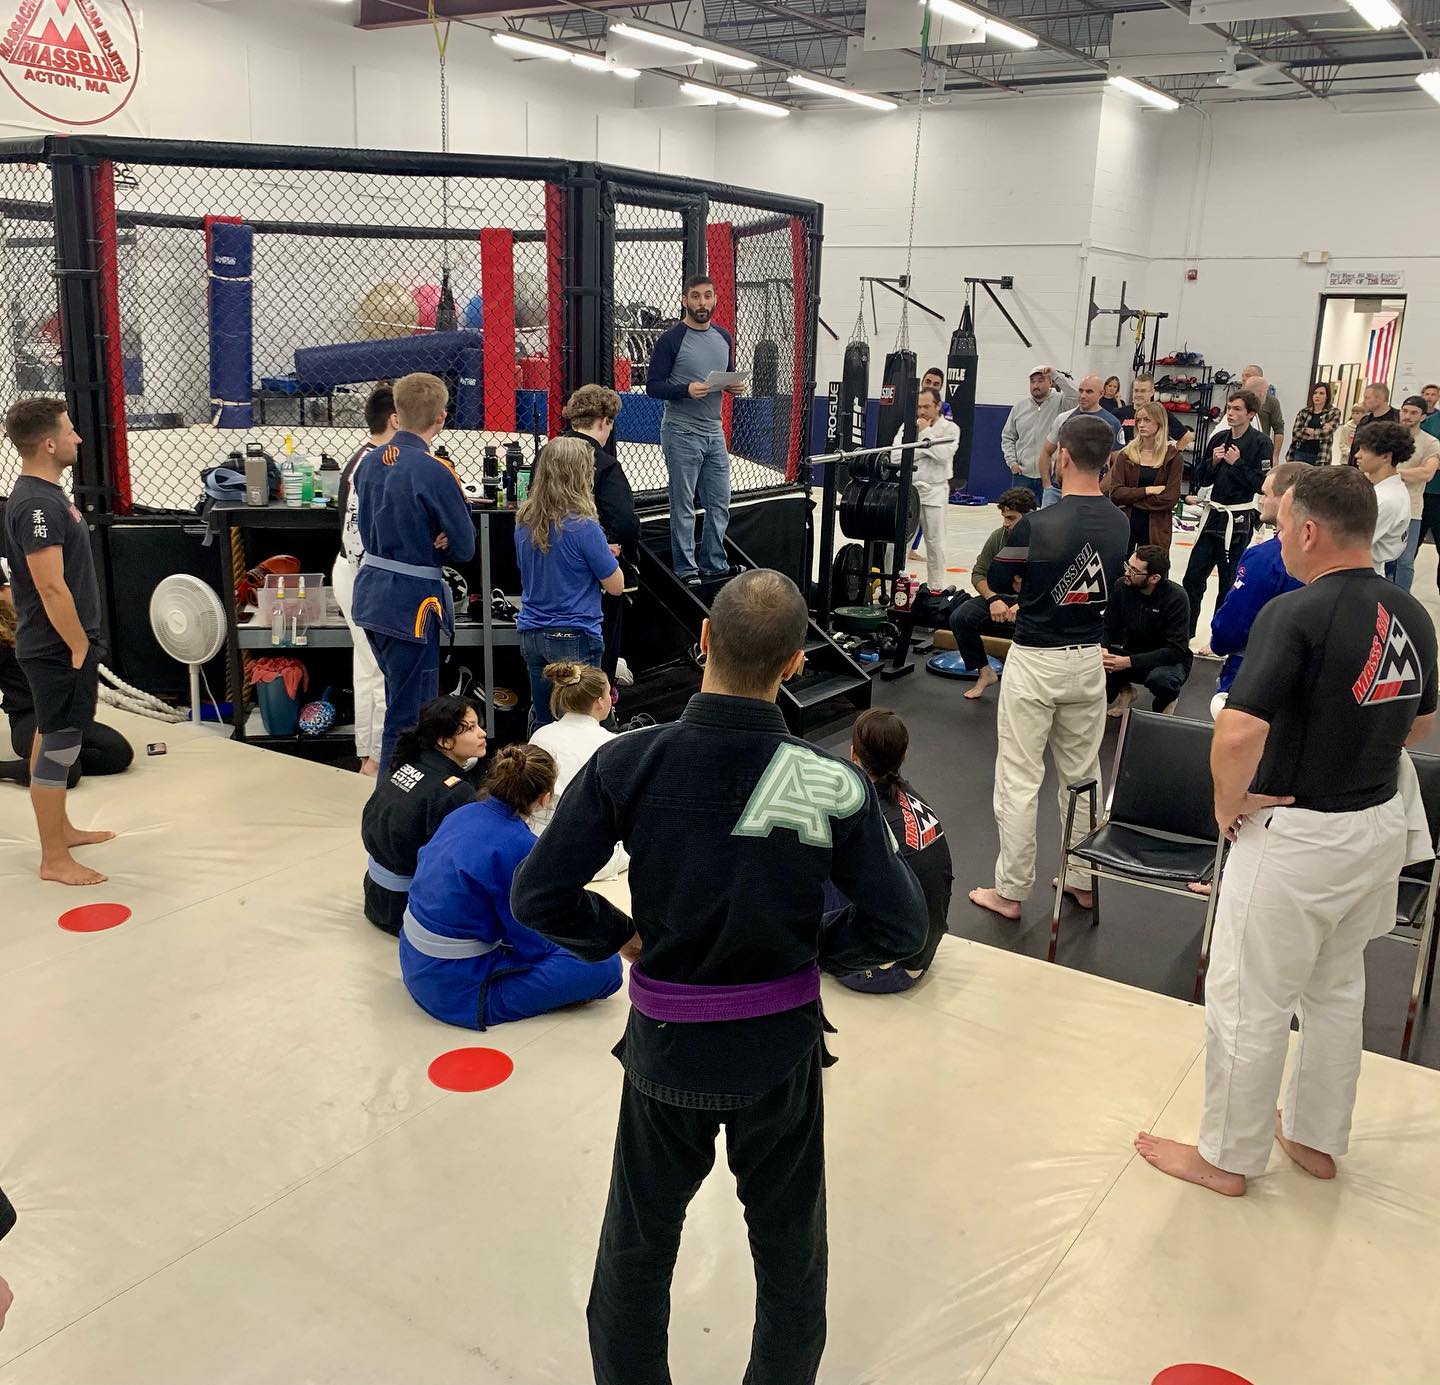 Tournament at Mass BJJ in support of Open Table